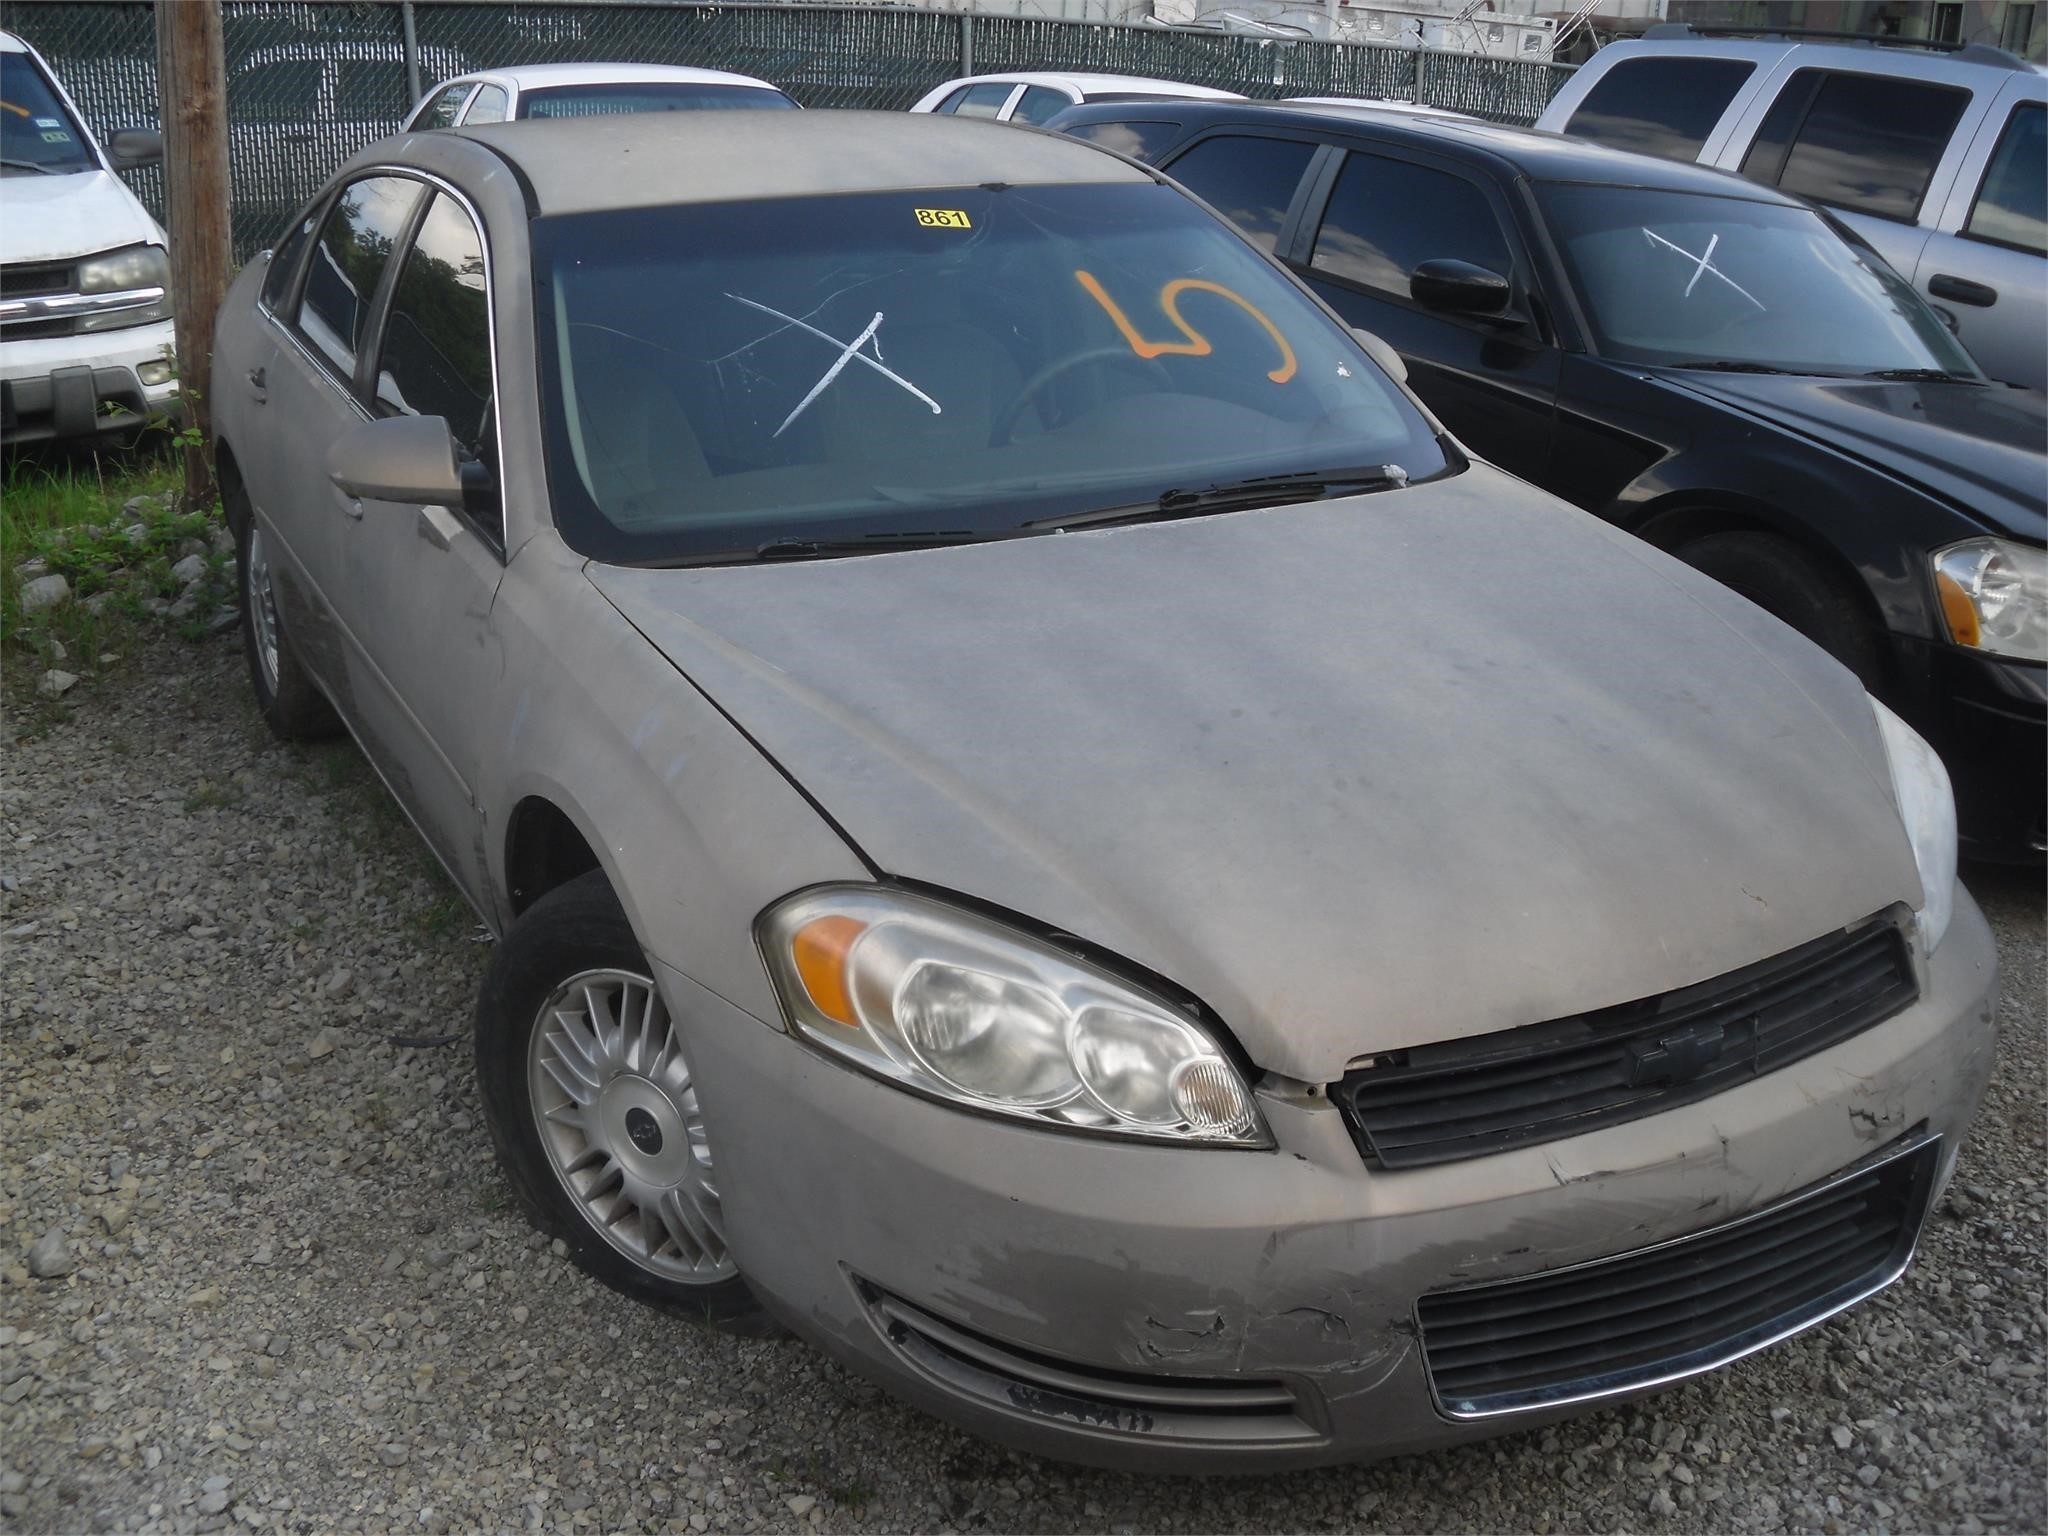 Monroe County Sheriffs Seized and  Surplus Vehicle auction.